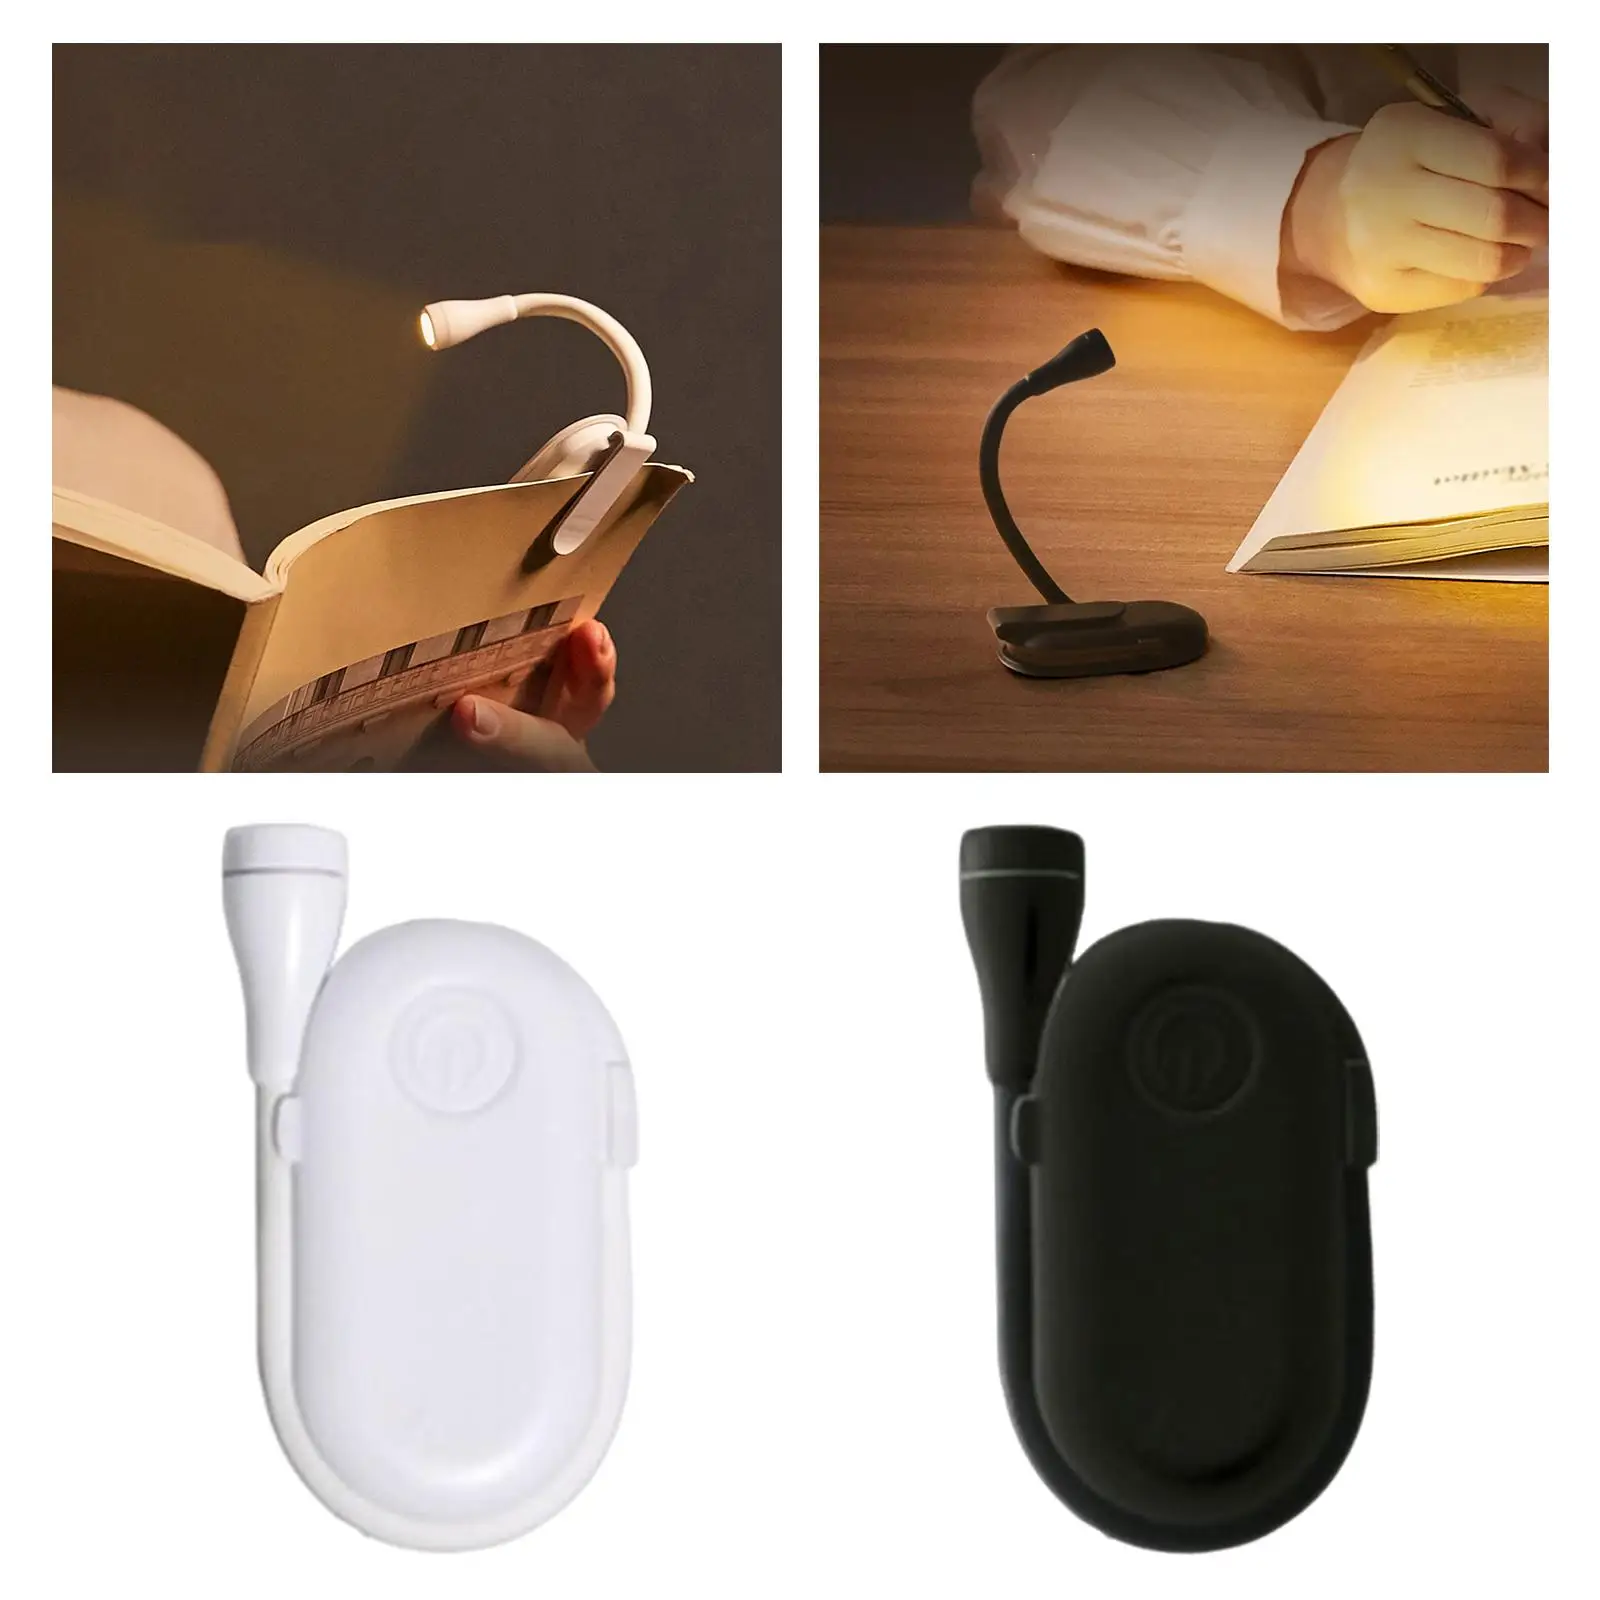 Eye Protection LED Clip On Reading Light Book Light Rechargeable Reading Lamp for Bed Books Music Stand Headboard Working